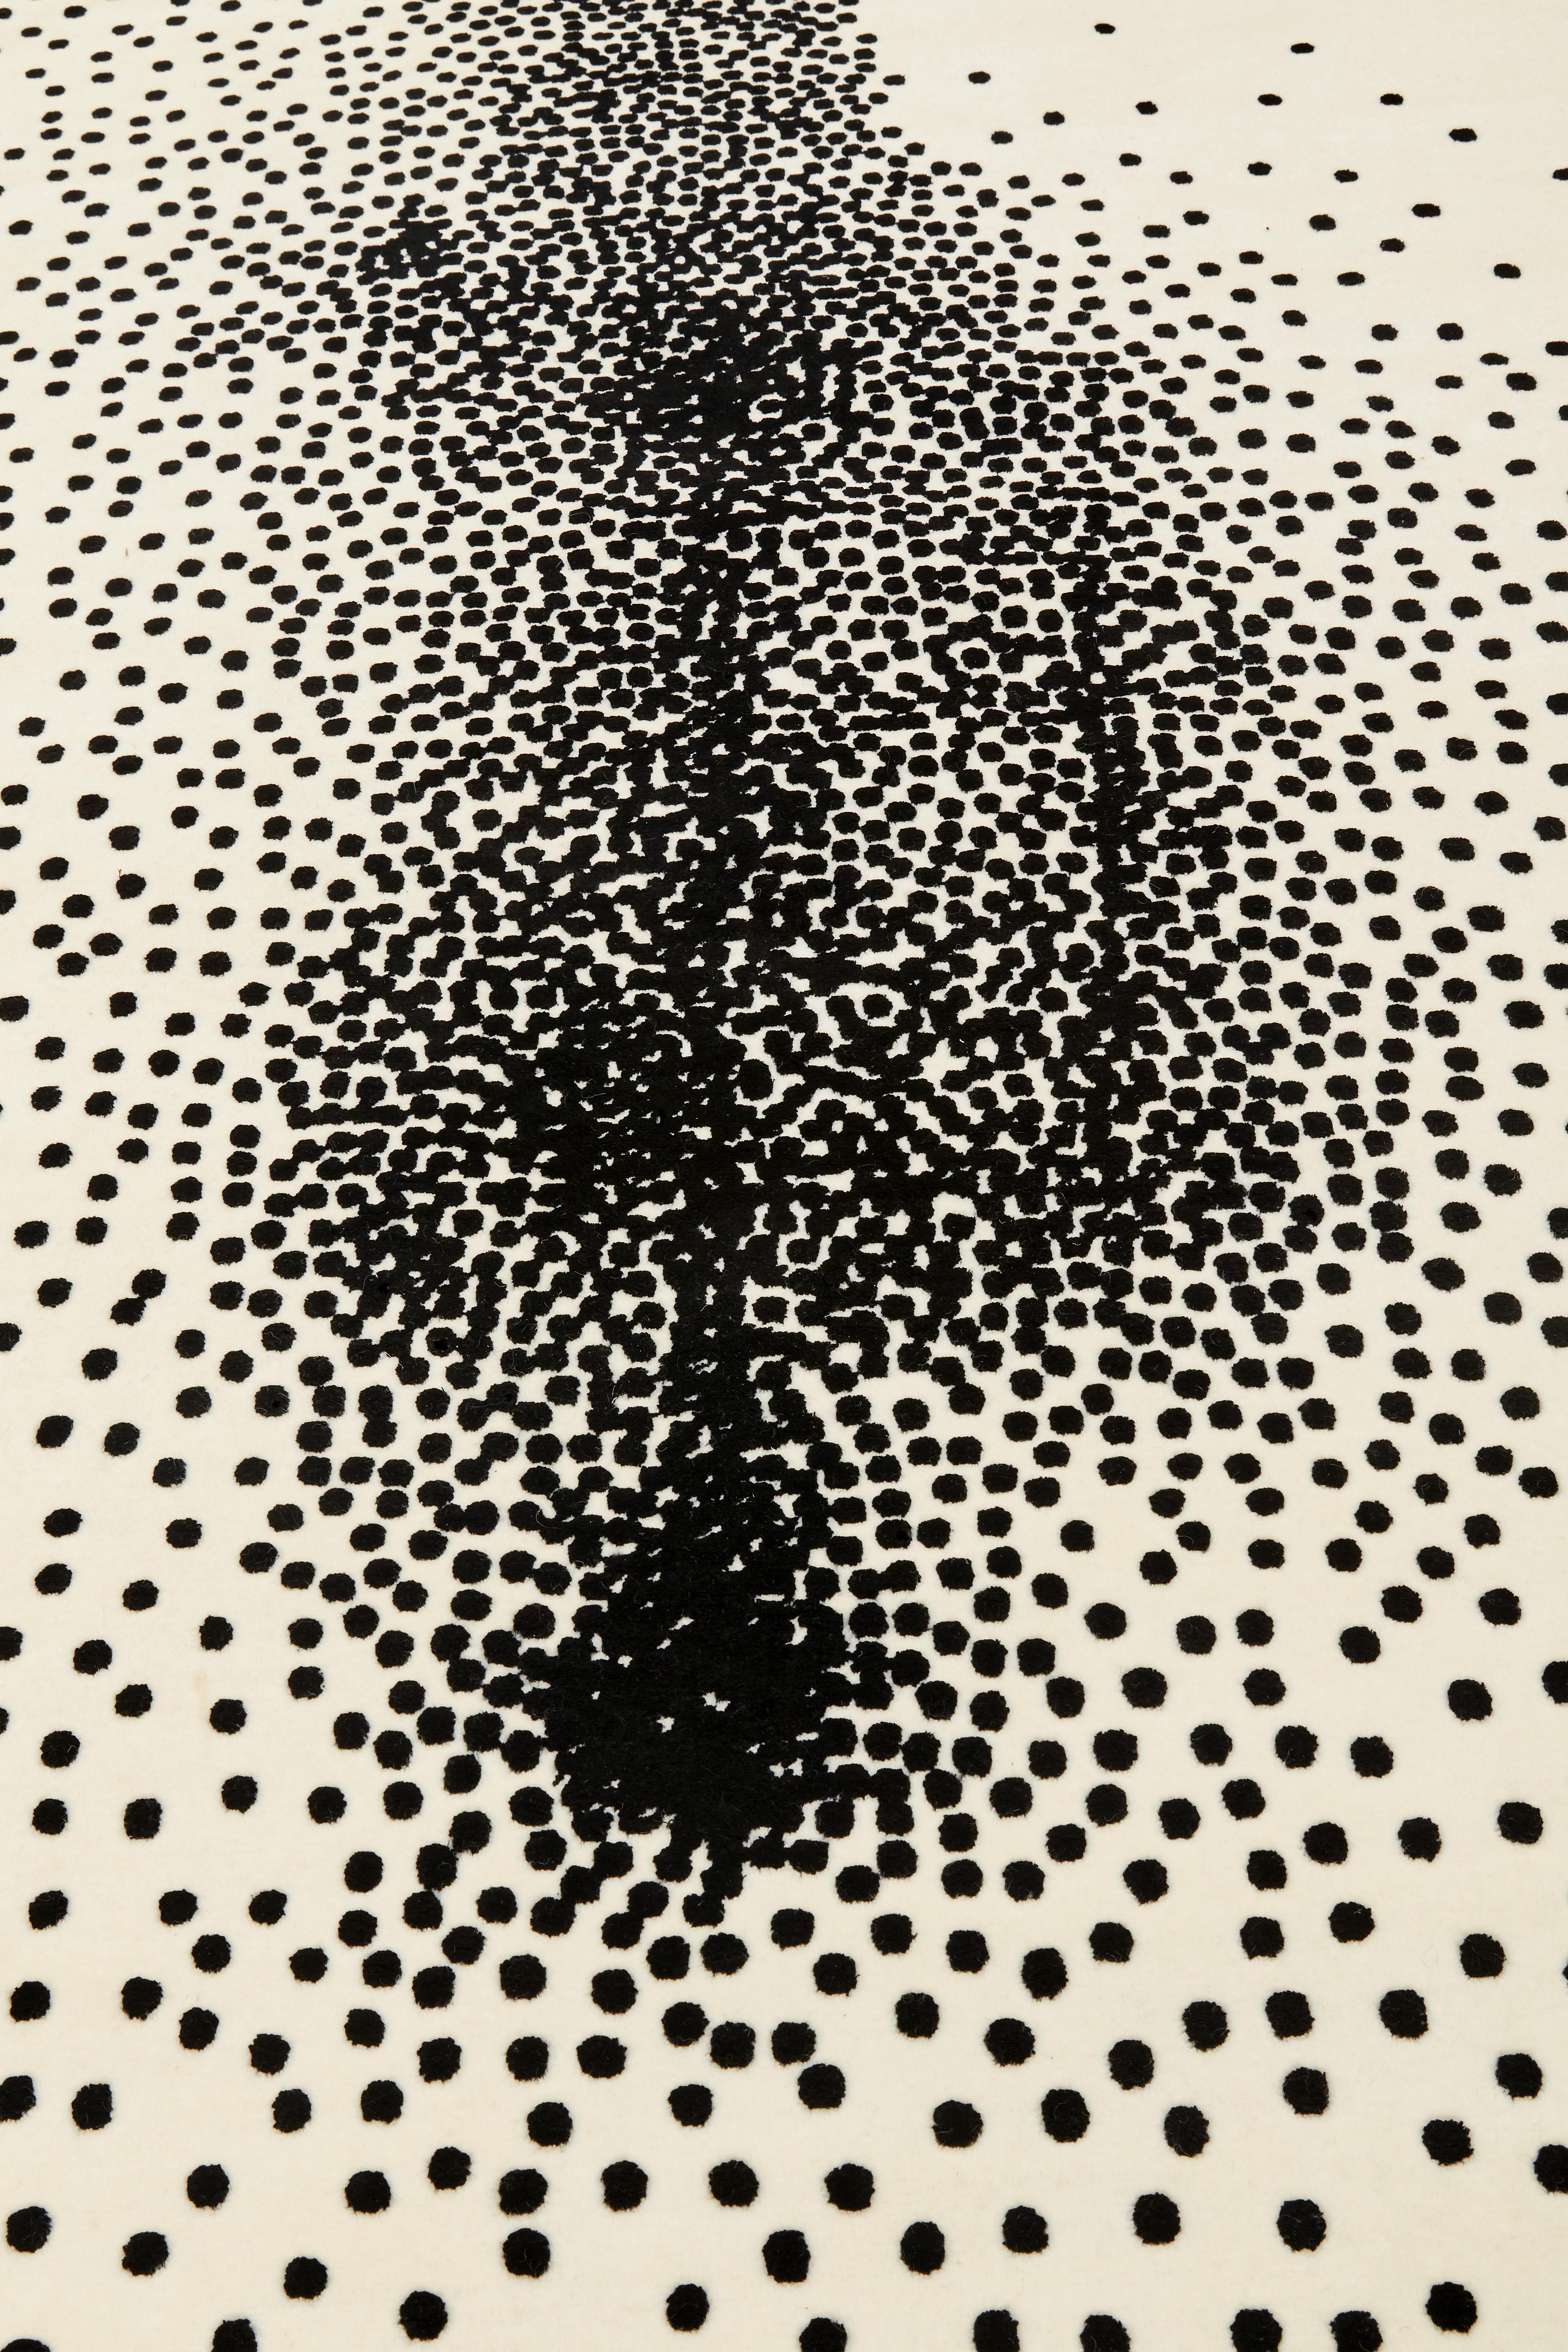 Particles are a handcrafted rug that pays an affectionate tribute to the philosophical work of Gottfried Leibniz, specifically to his theory concerning monads, seen as indivisible fundamental existing entities. Measures: 200 x 300 cm.
The unique